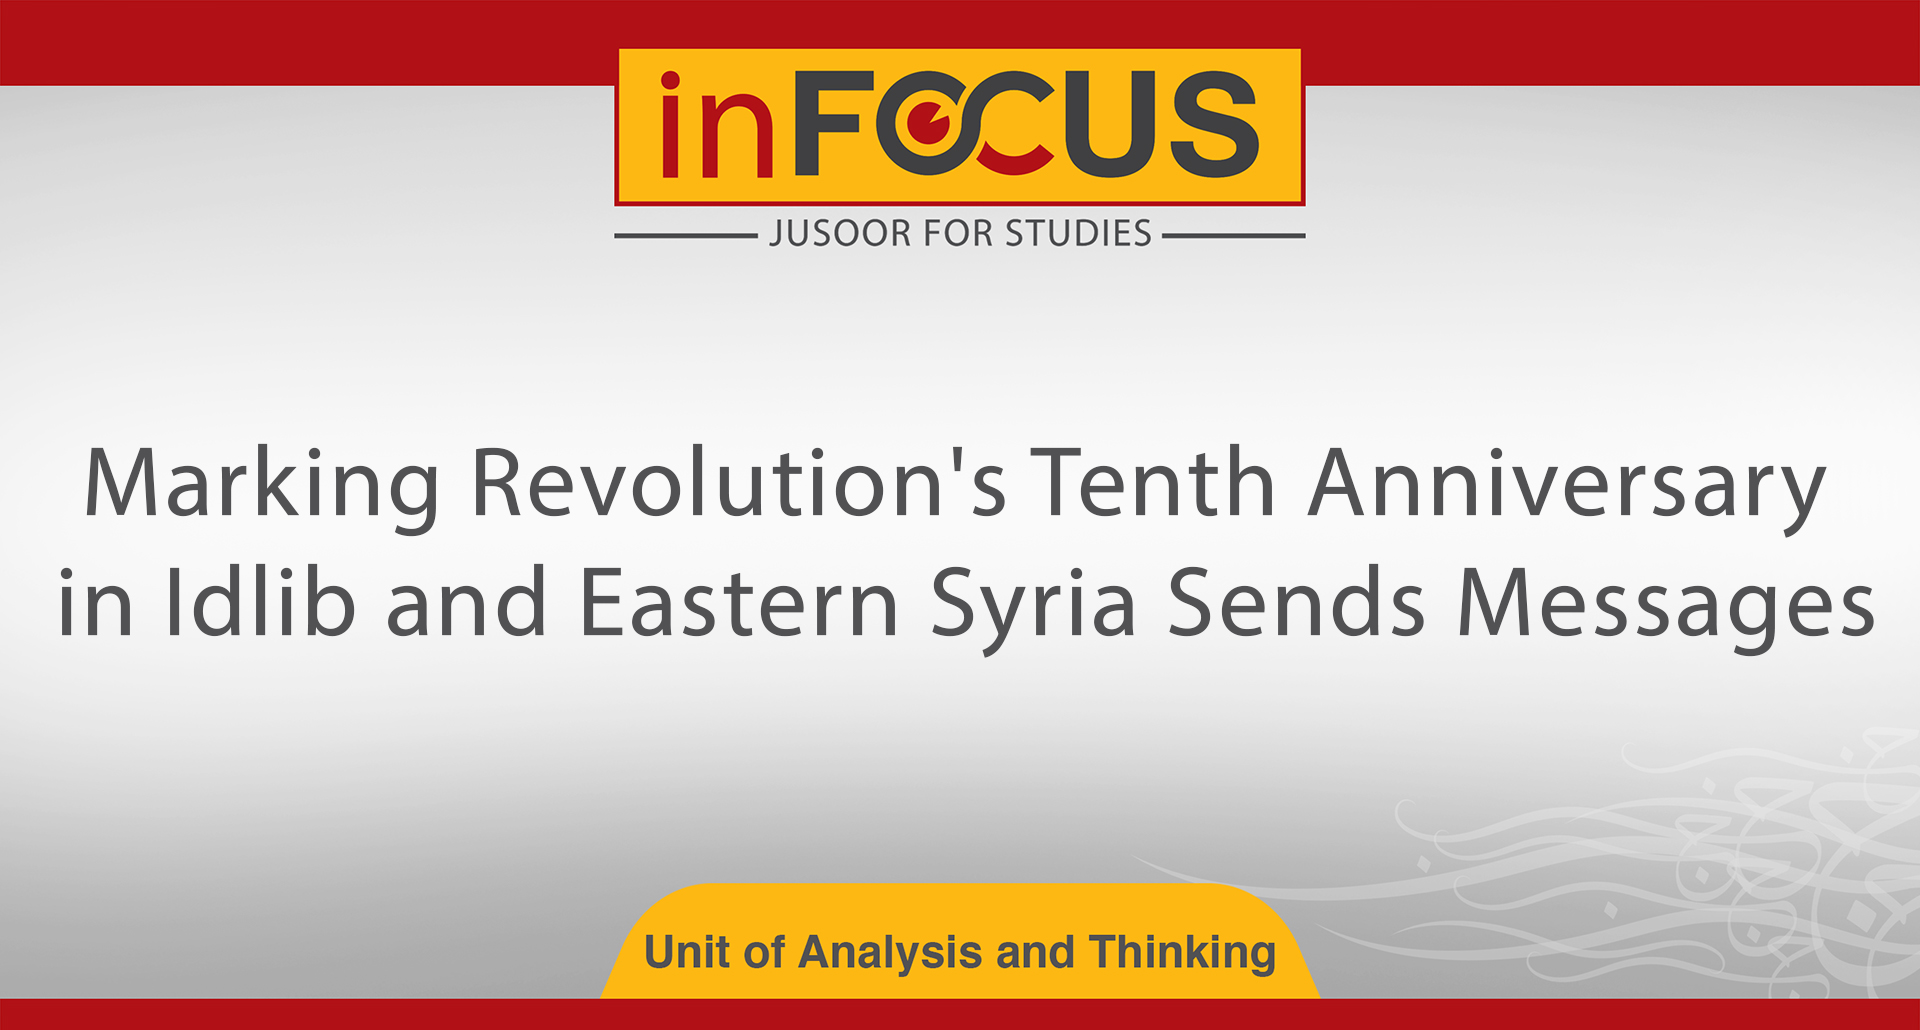 Marking Revolution's Tenth Anniversary in Idlib and Eastern Syria Sends Messages